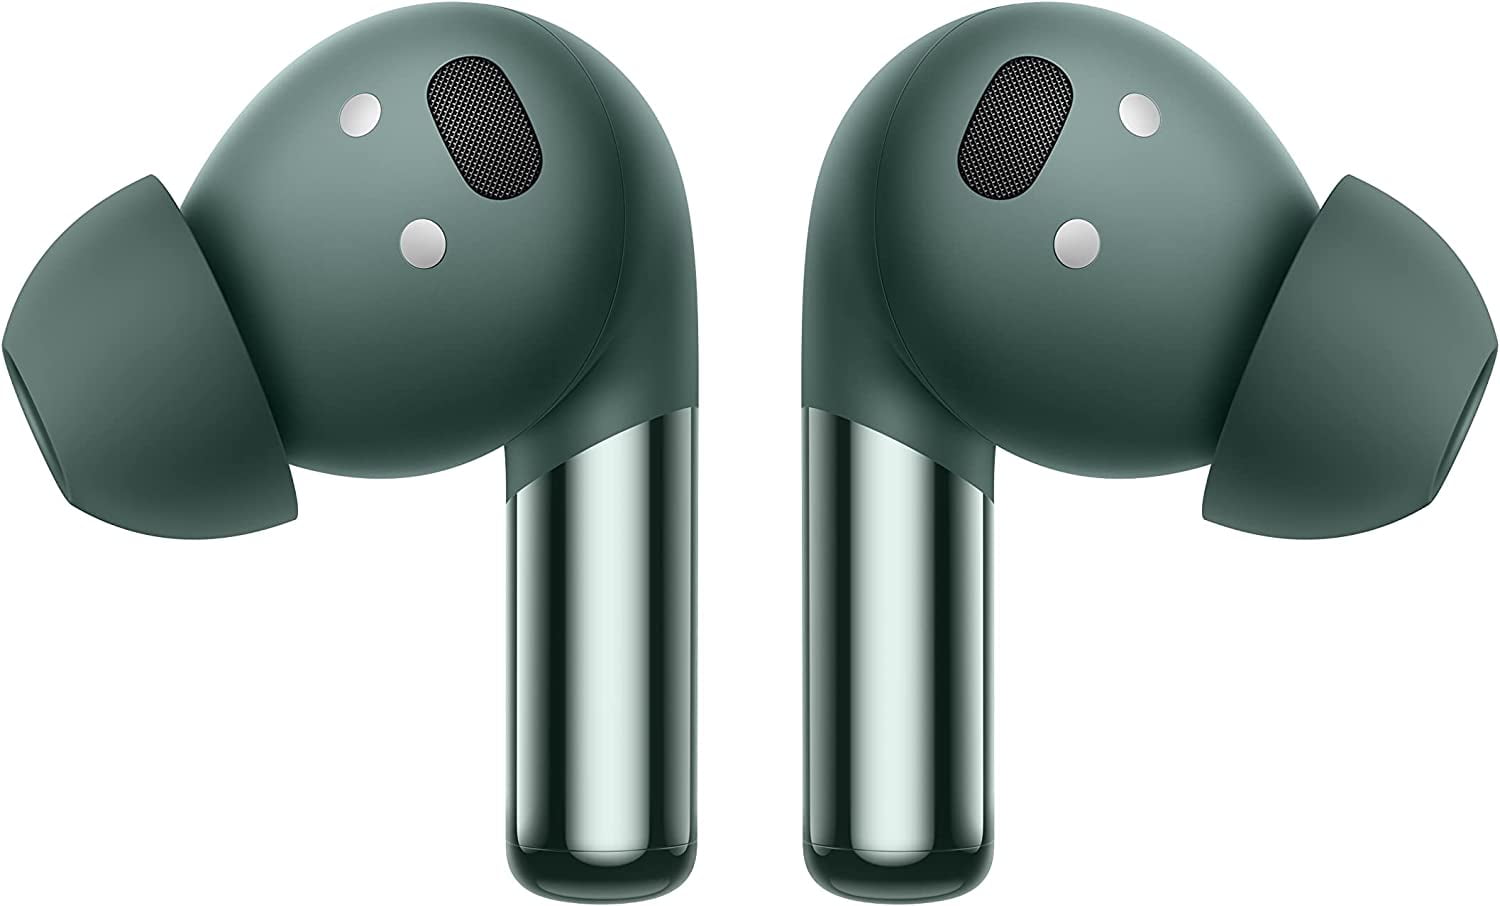 Buy OnePlus Buds Pro 2 Bluetooth (Green) Online At Best Price @ Tata CLiQ